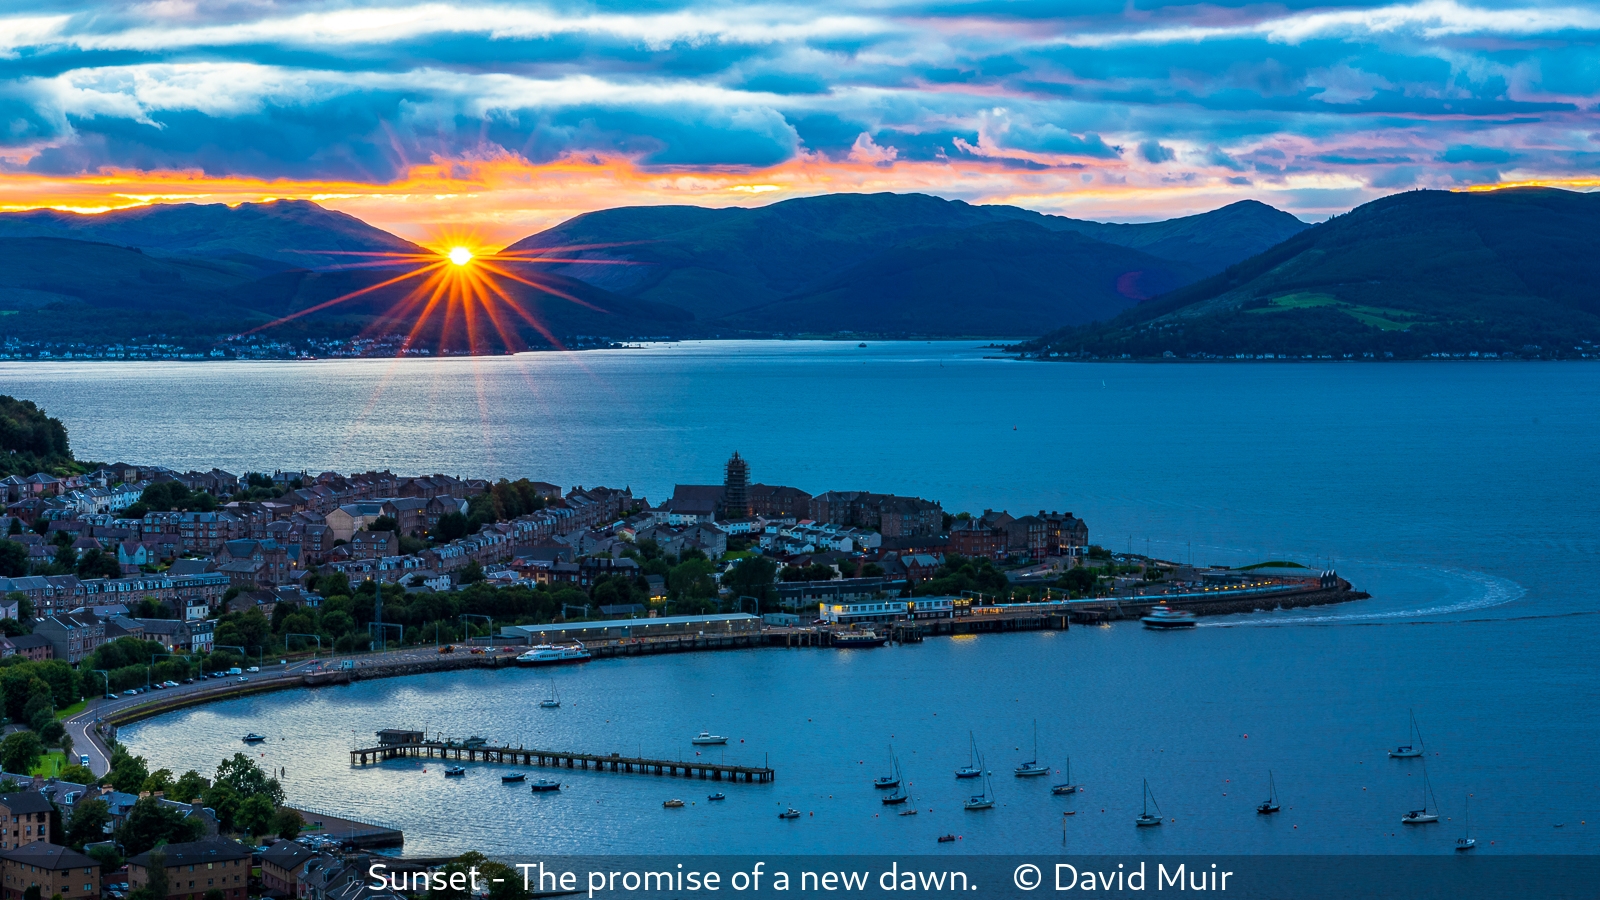 David Muir_Sunset - The promise of a new dawn.